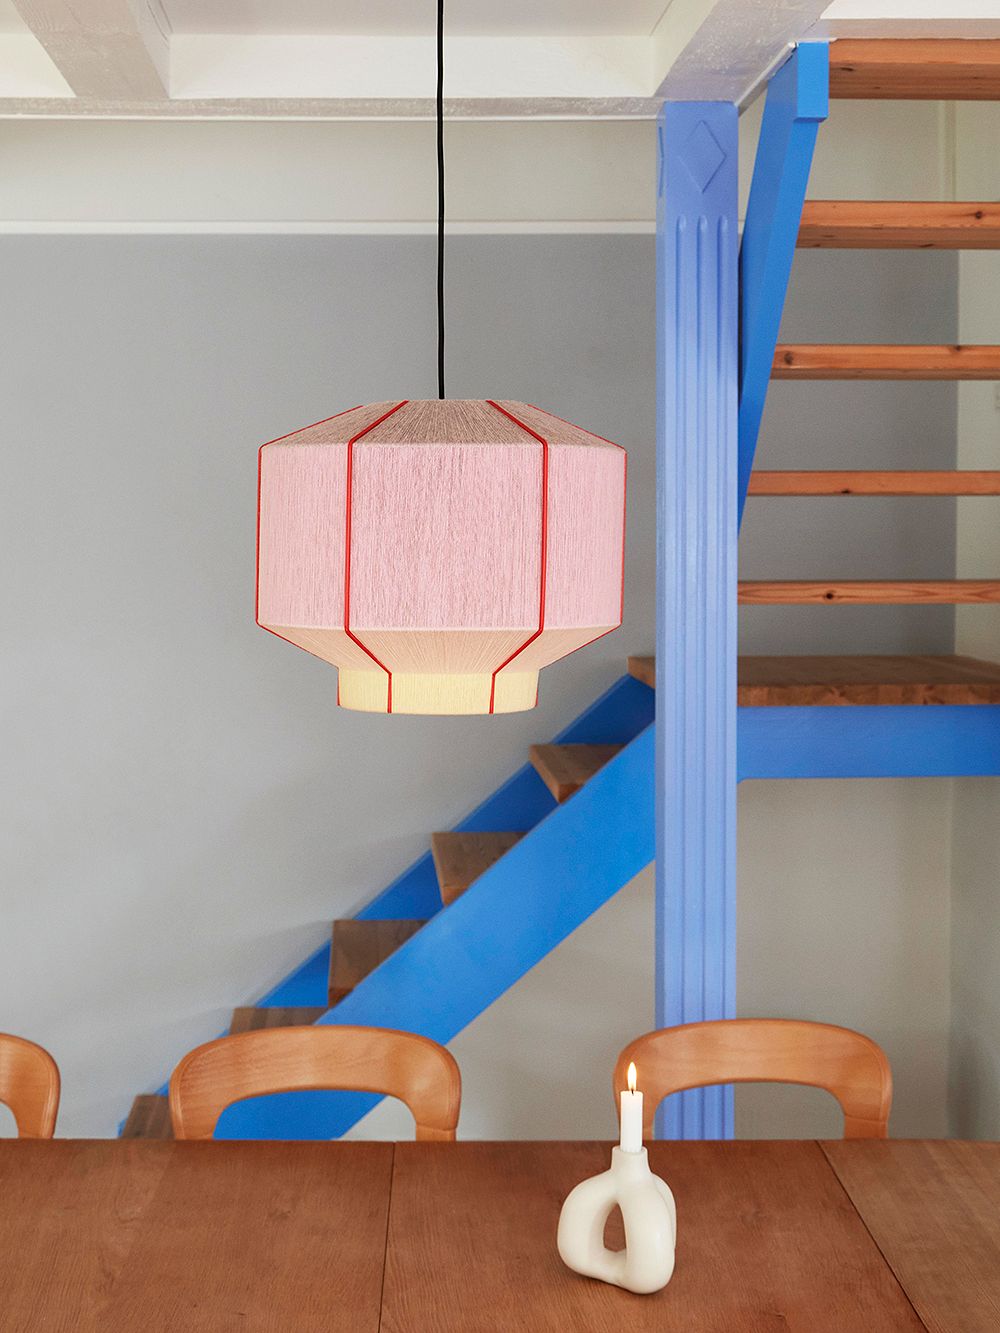 Bonbon lampshade in front of blue-painted stairs